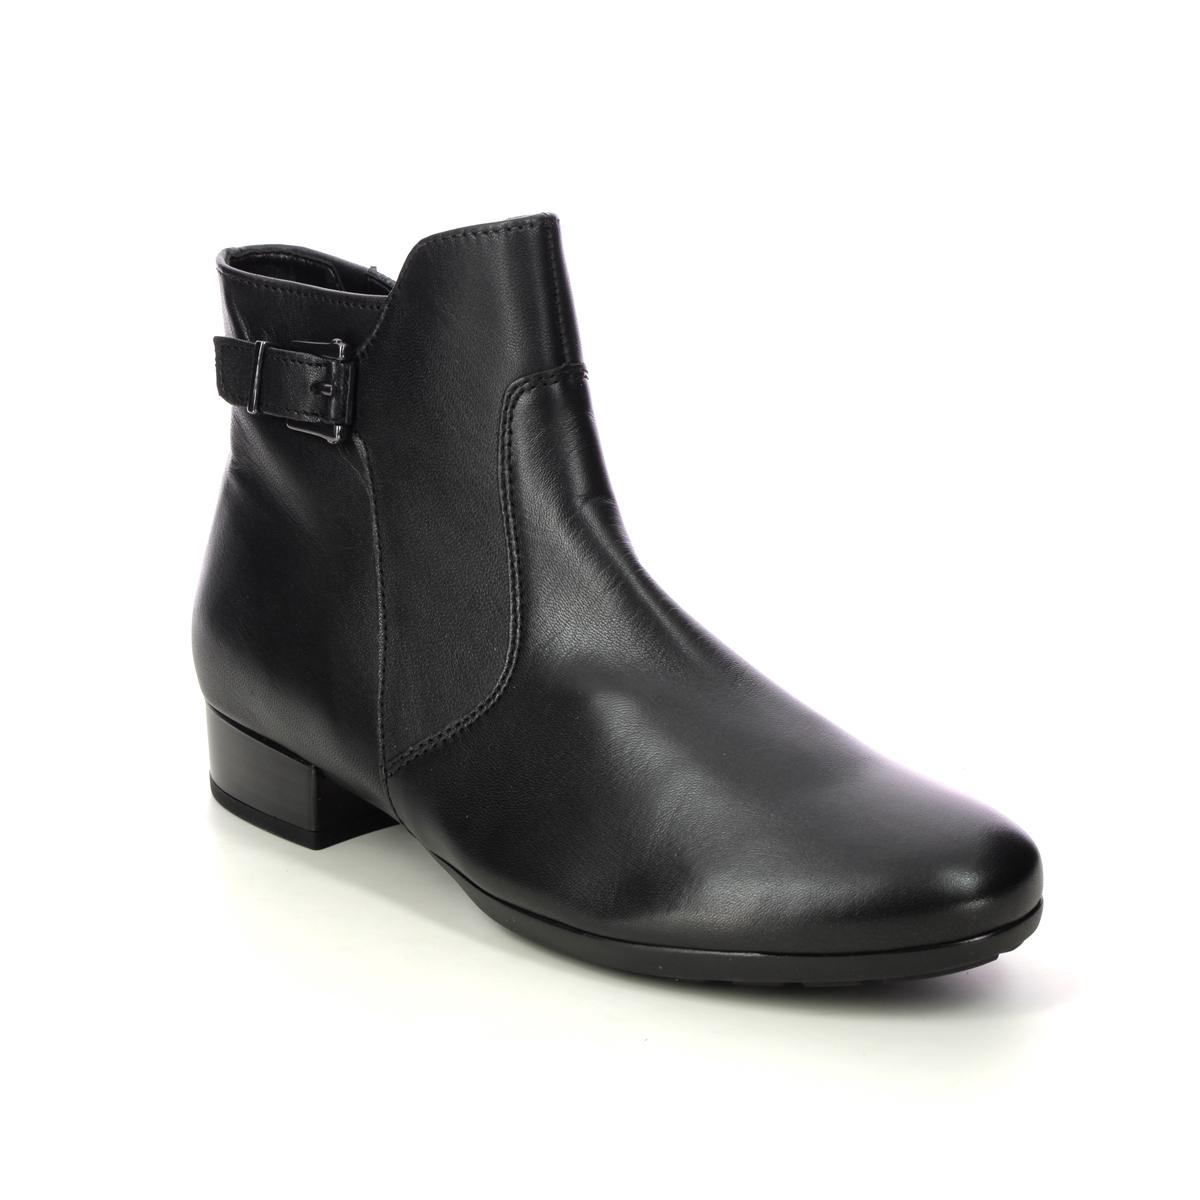 Gabor Bolan Wide Breck Black leather Womens Heeled Boots 32.714.27 in a Plain Leather in Size 5.5